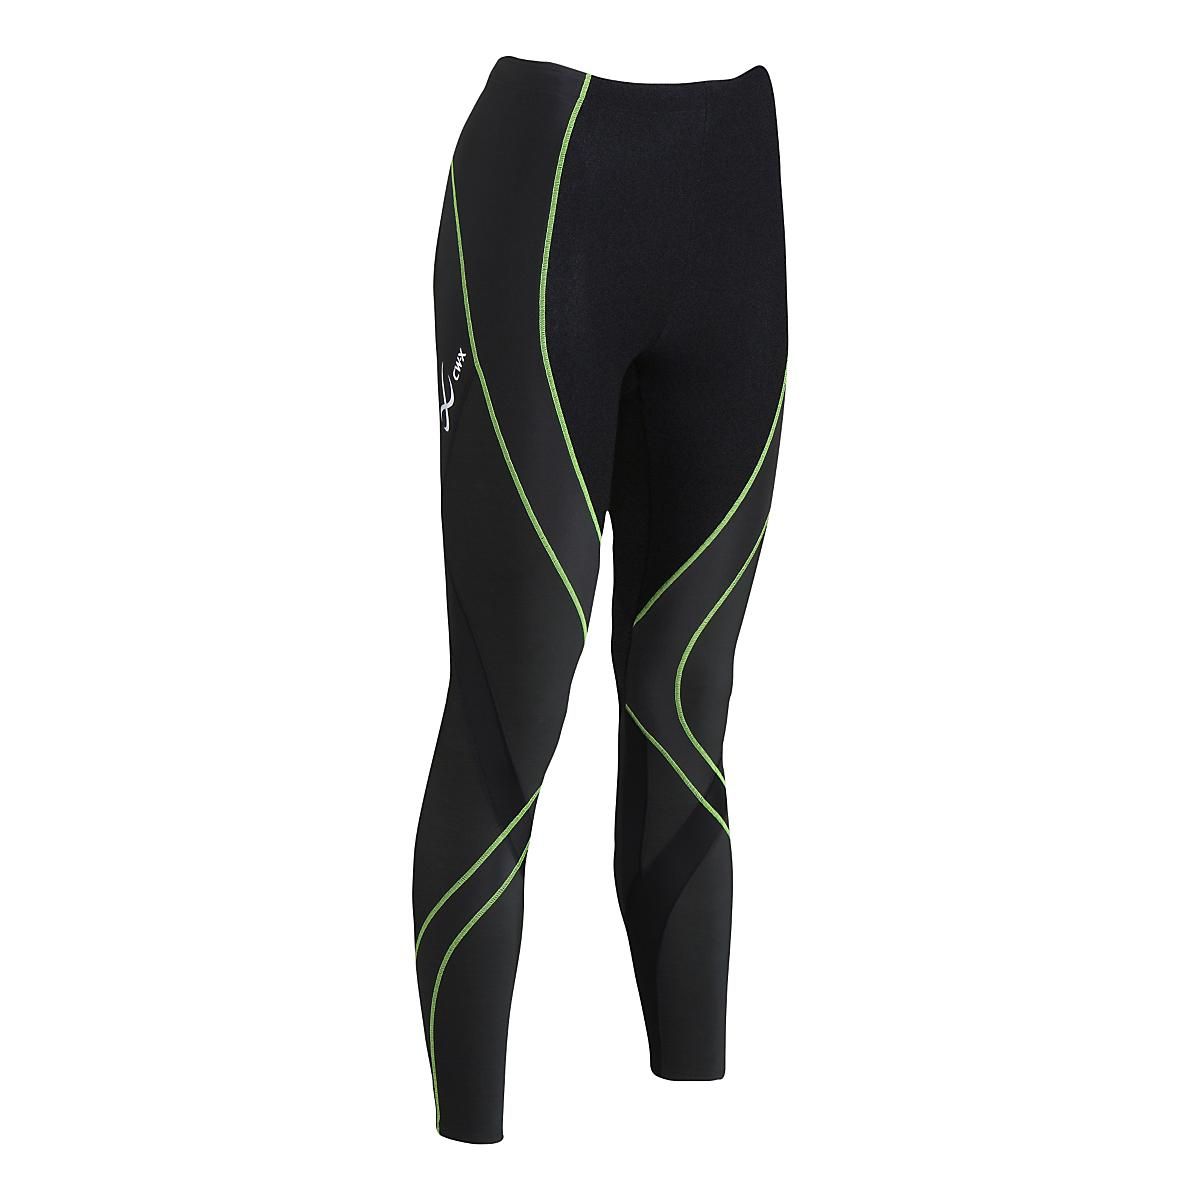 cw x insulator tights review